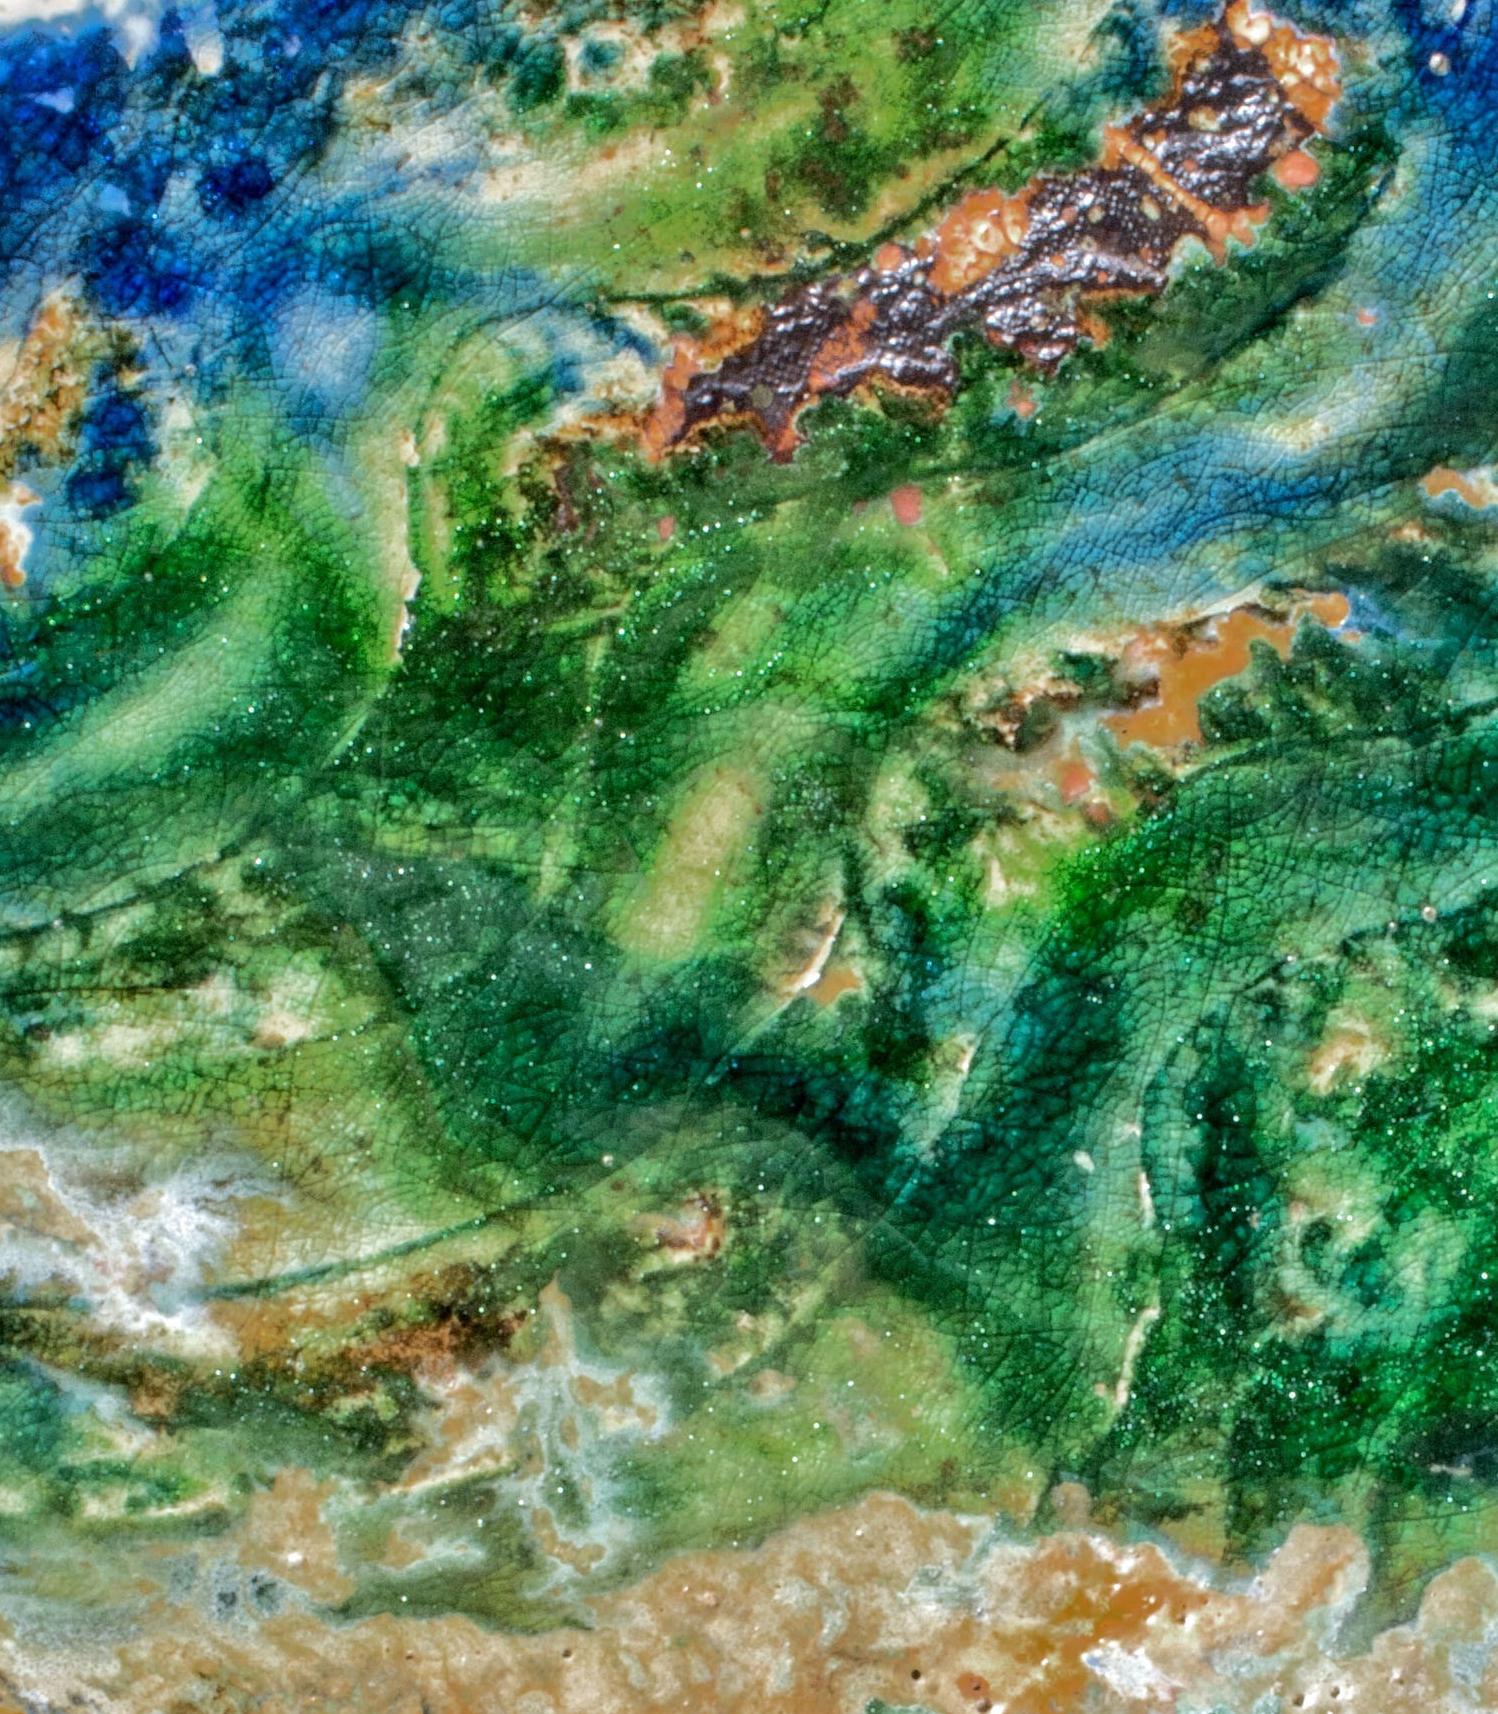 Great Lake, textured ceramic in bright blues, greens and cream, embodies the essence of clay in its organic shapes that refer directly to the earth and nature. The artist says 